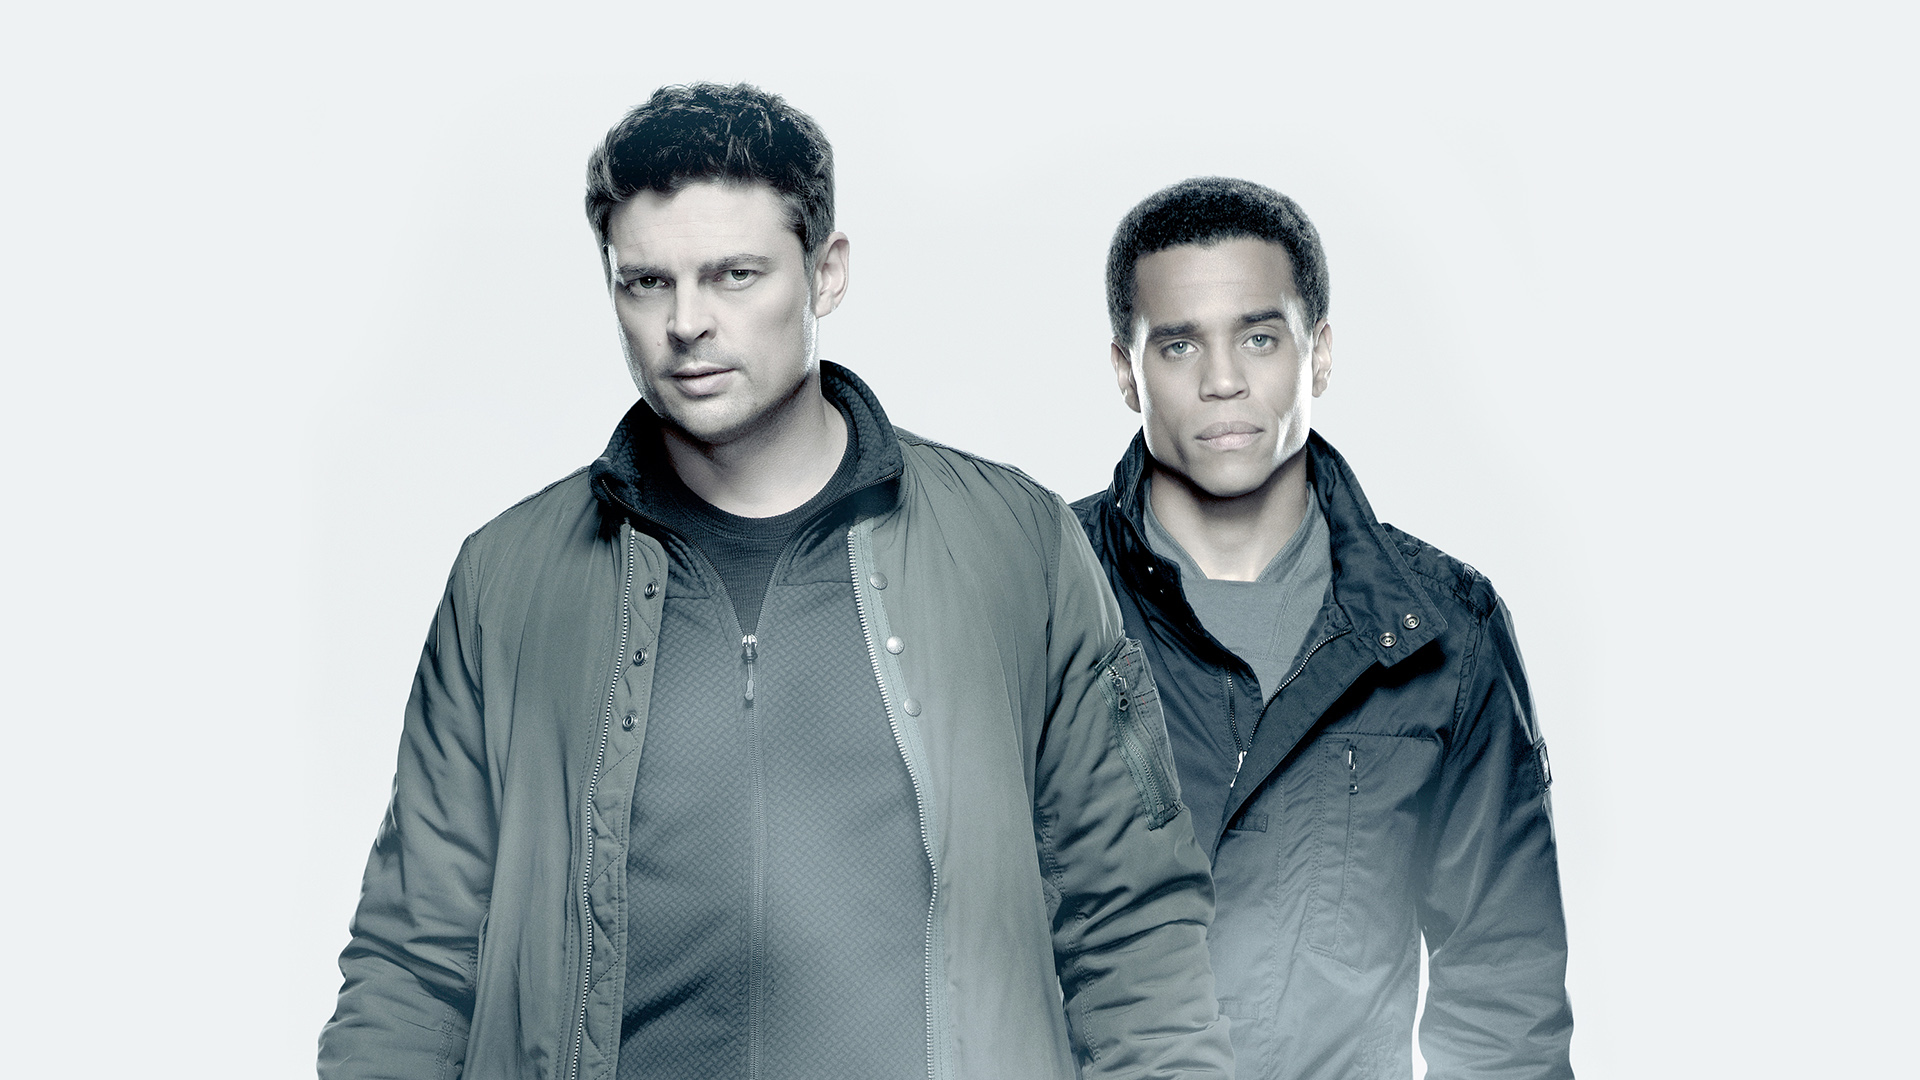 TV Show Almost Human 1920x1080